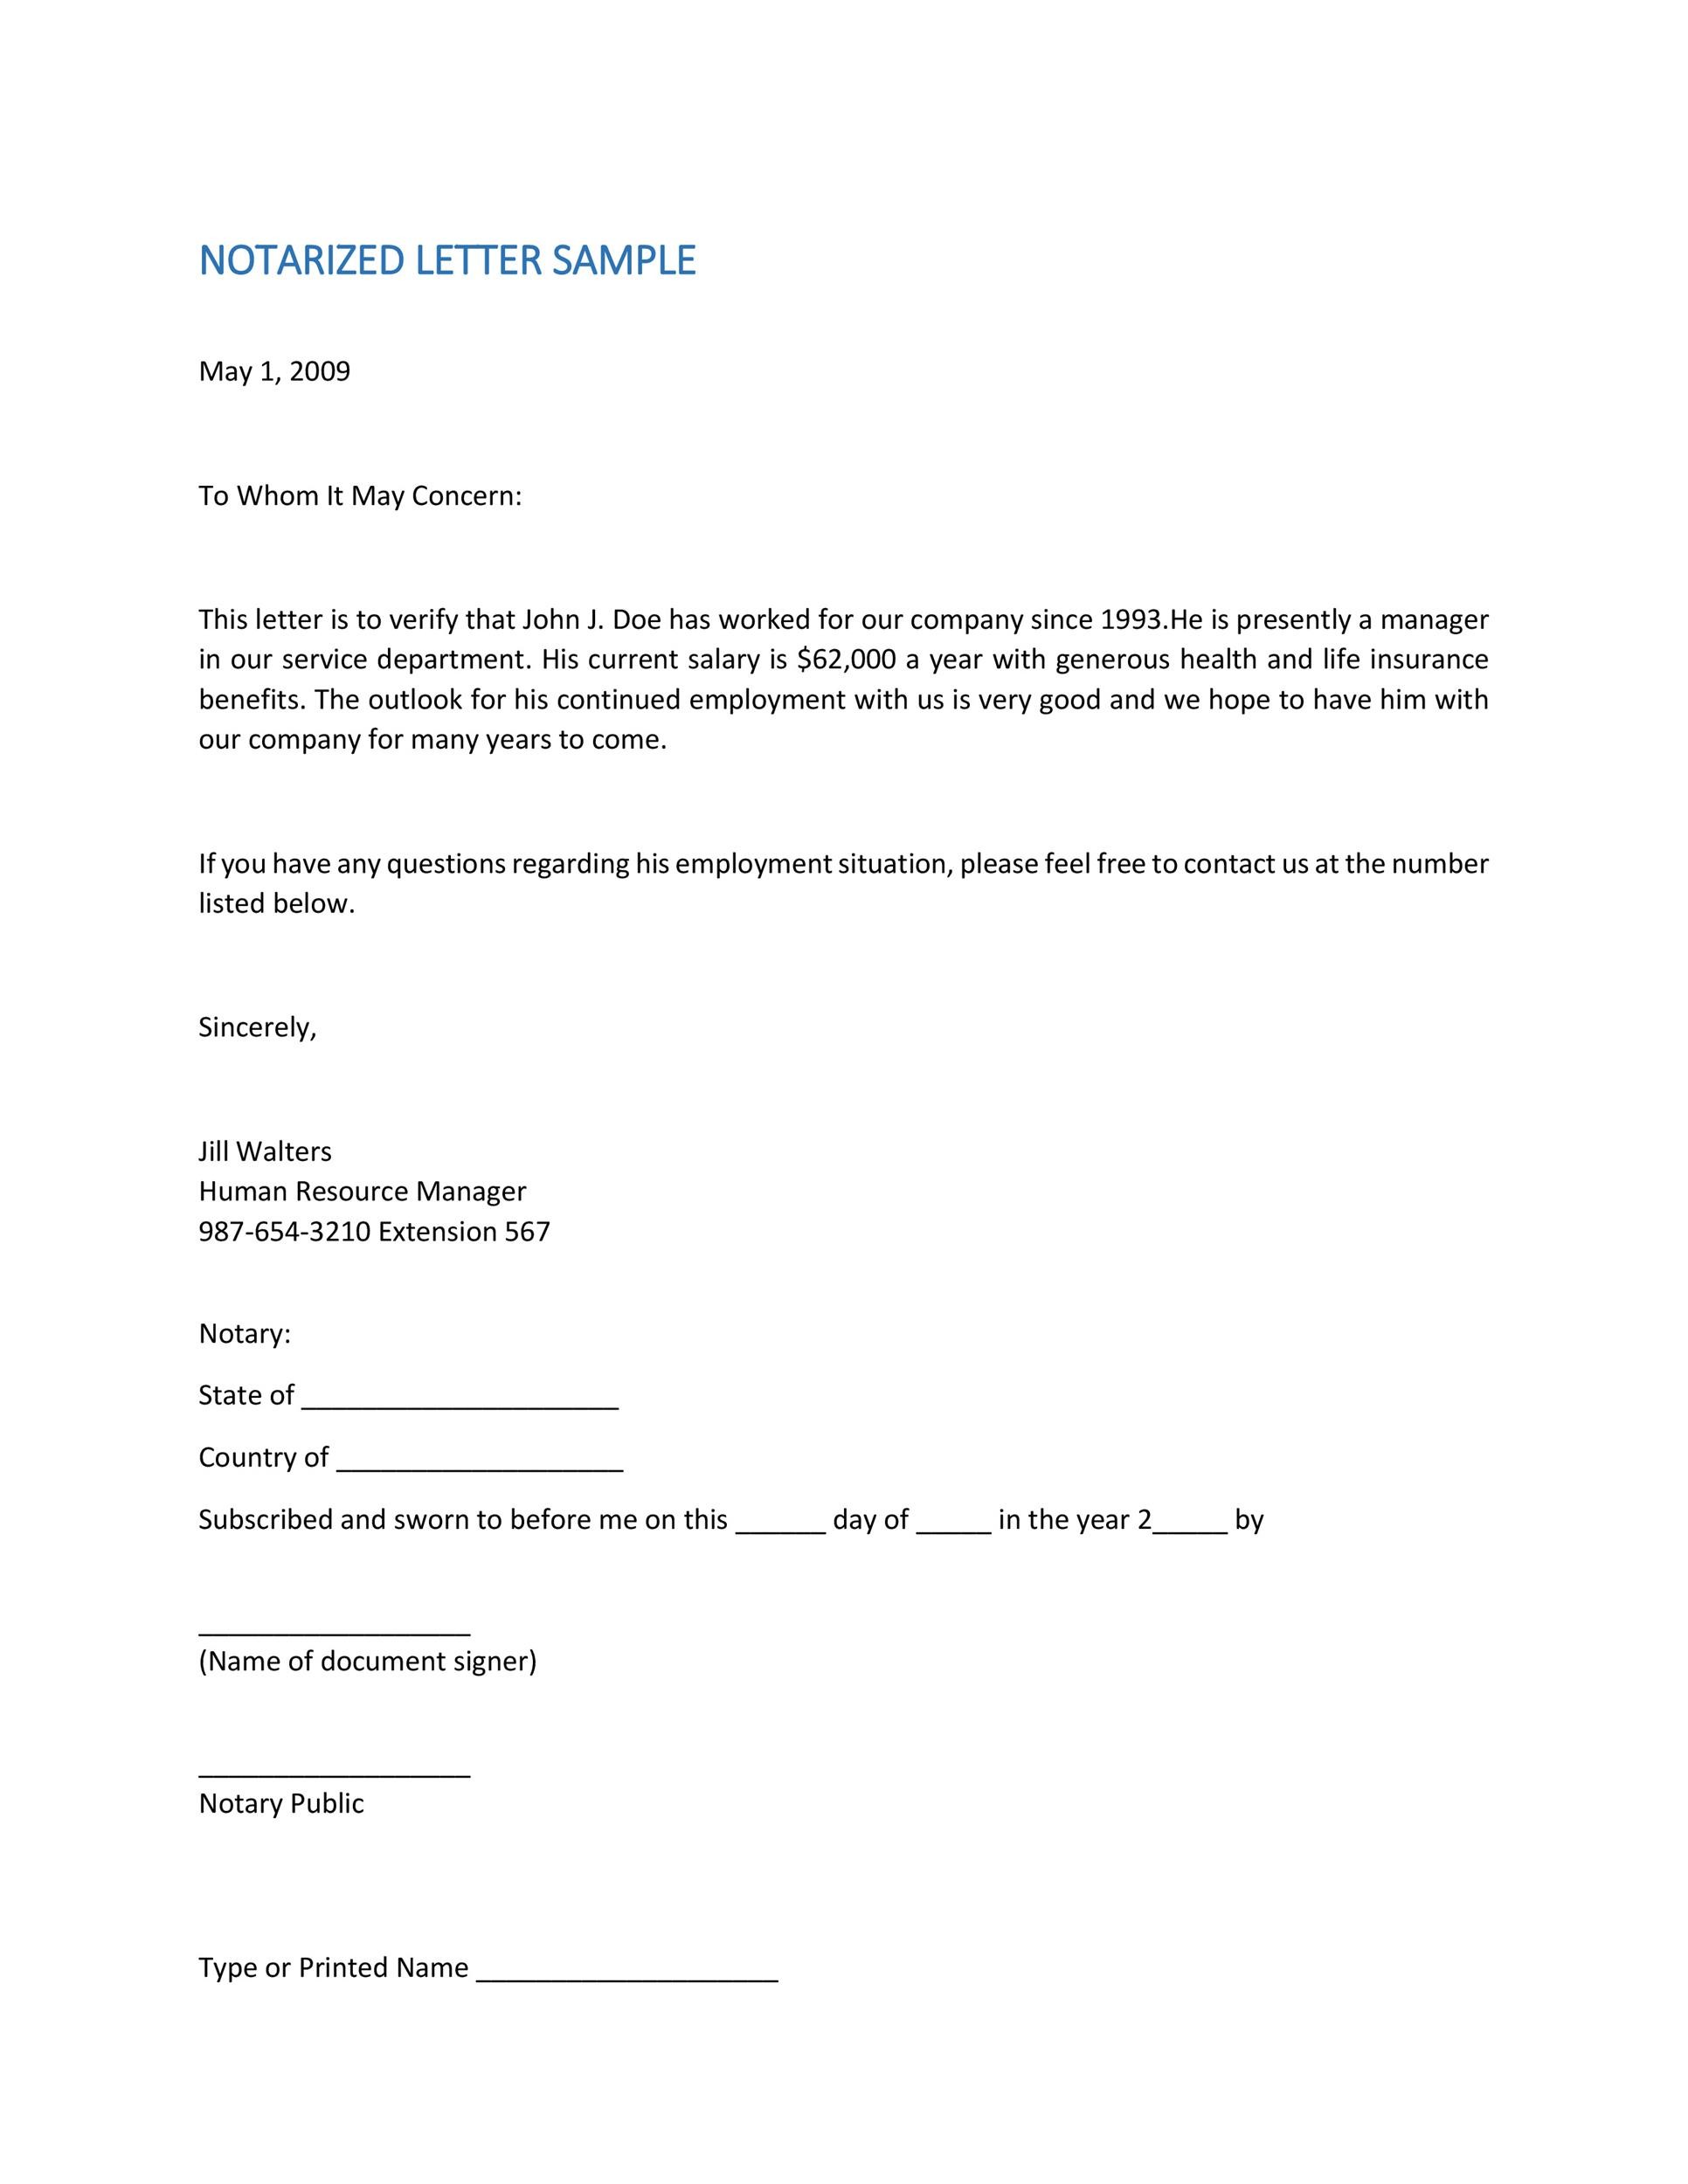 30  Professional Notarized Letter Templates ᐅ TemplateLab